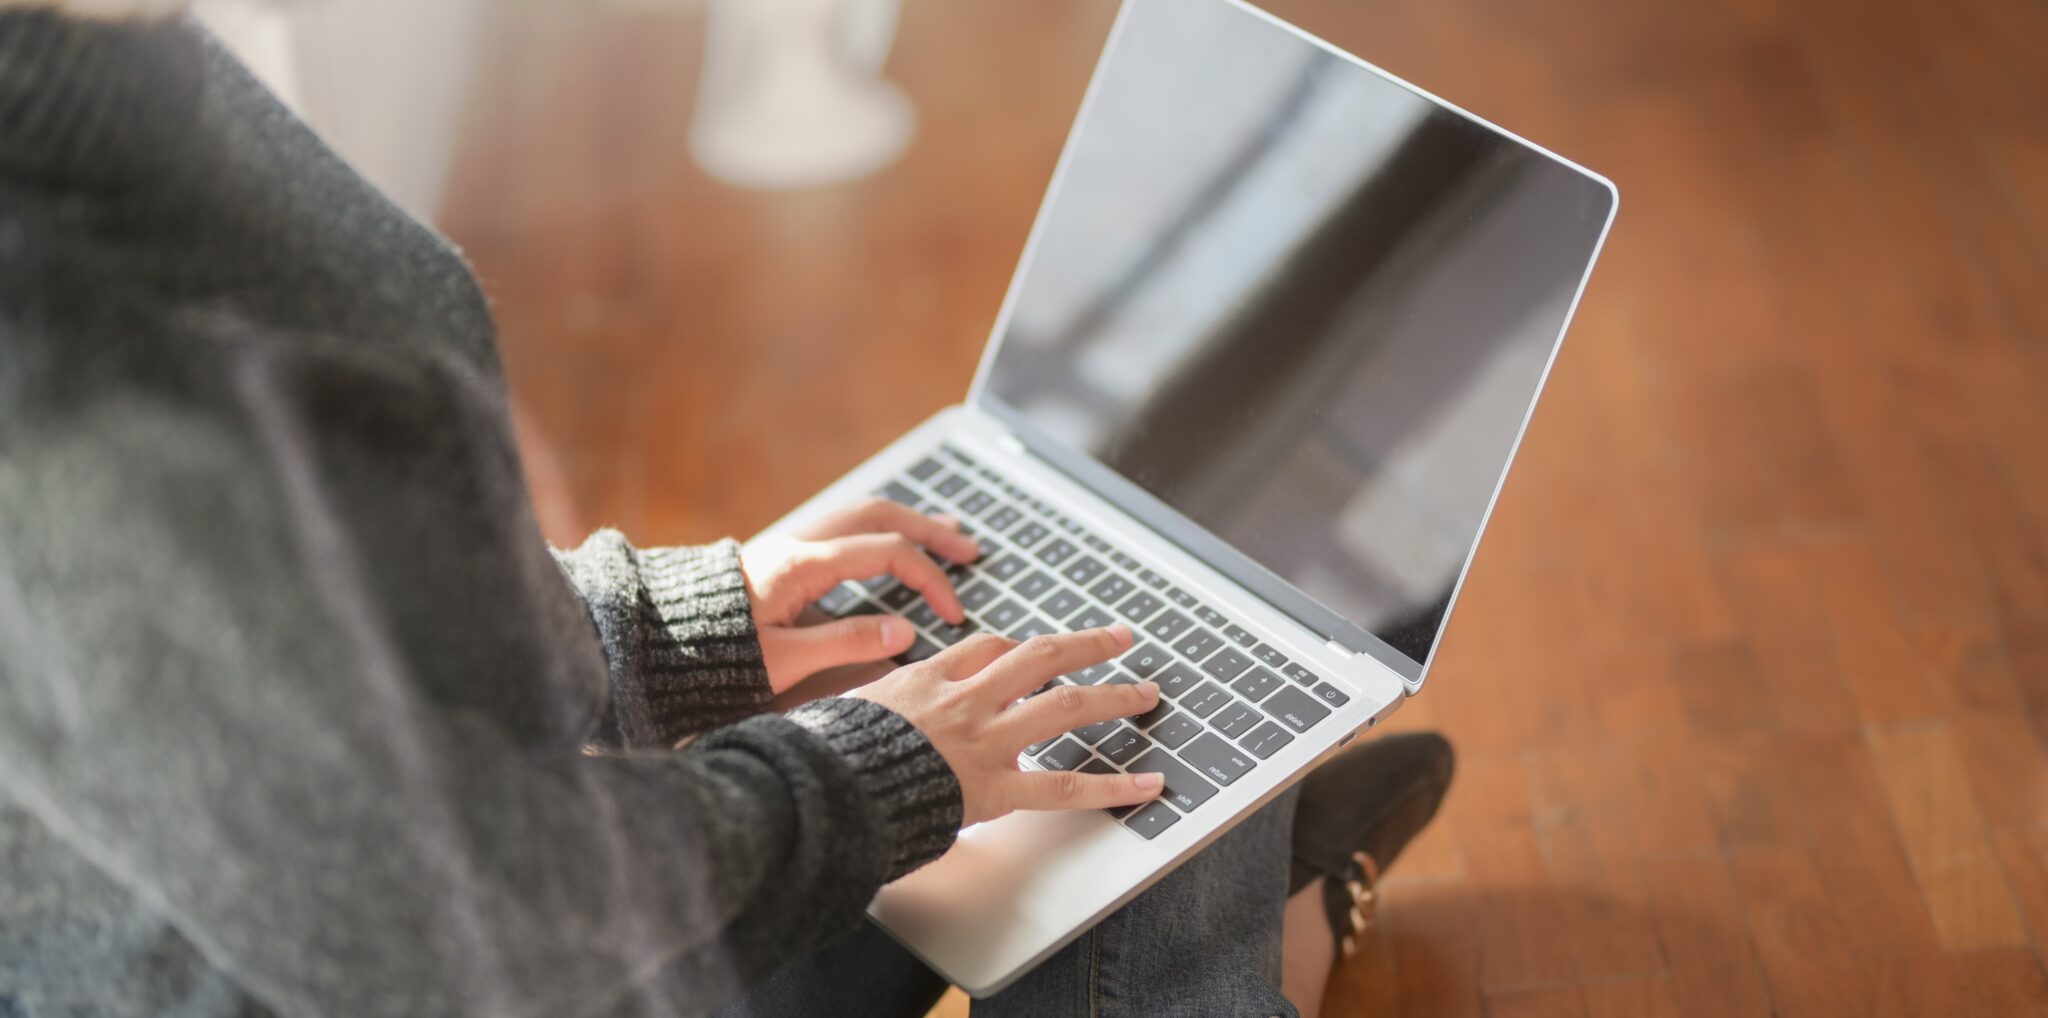 Transcreation, as the name implies, is more creative than normal translation. Description: A woman with a grey jumper typing on a MacBook laptop while sitting on the floor.